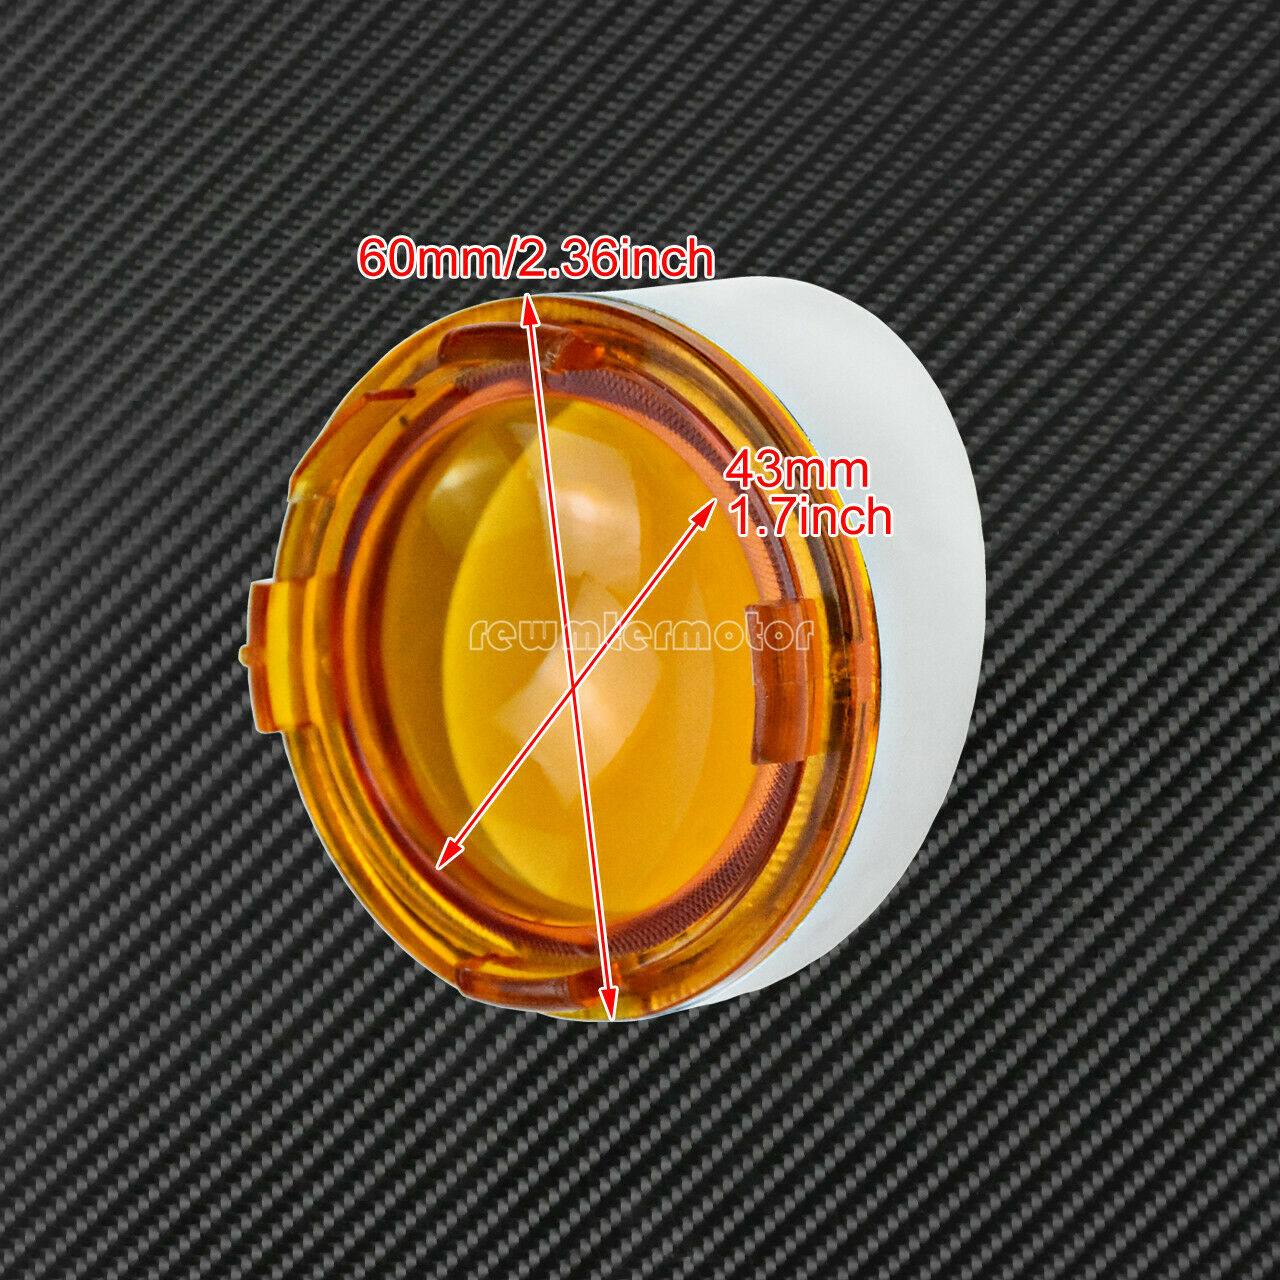 Turn Signal Lens Cover Visor Ring Fit For Harley Dyna Softail Glide Chrome Amber - Moto Life Products